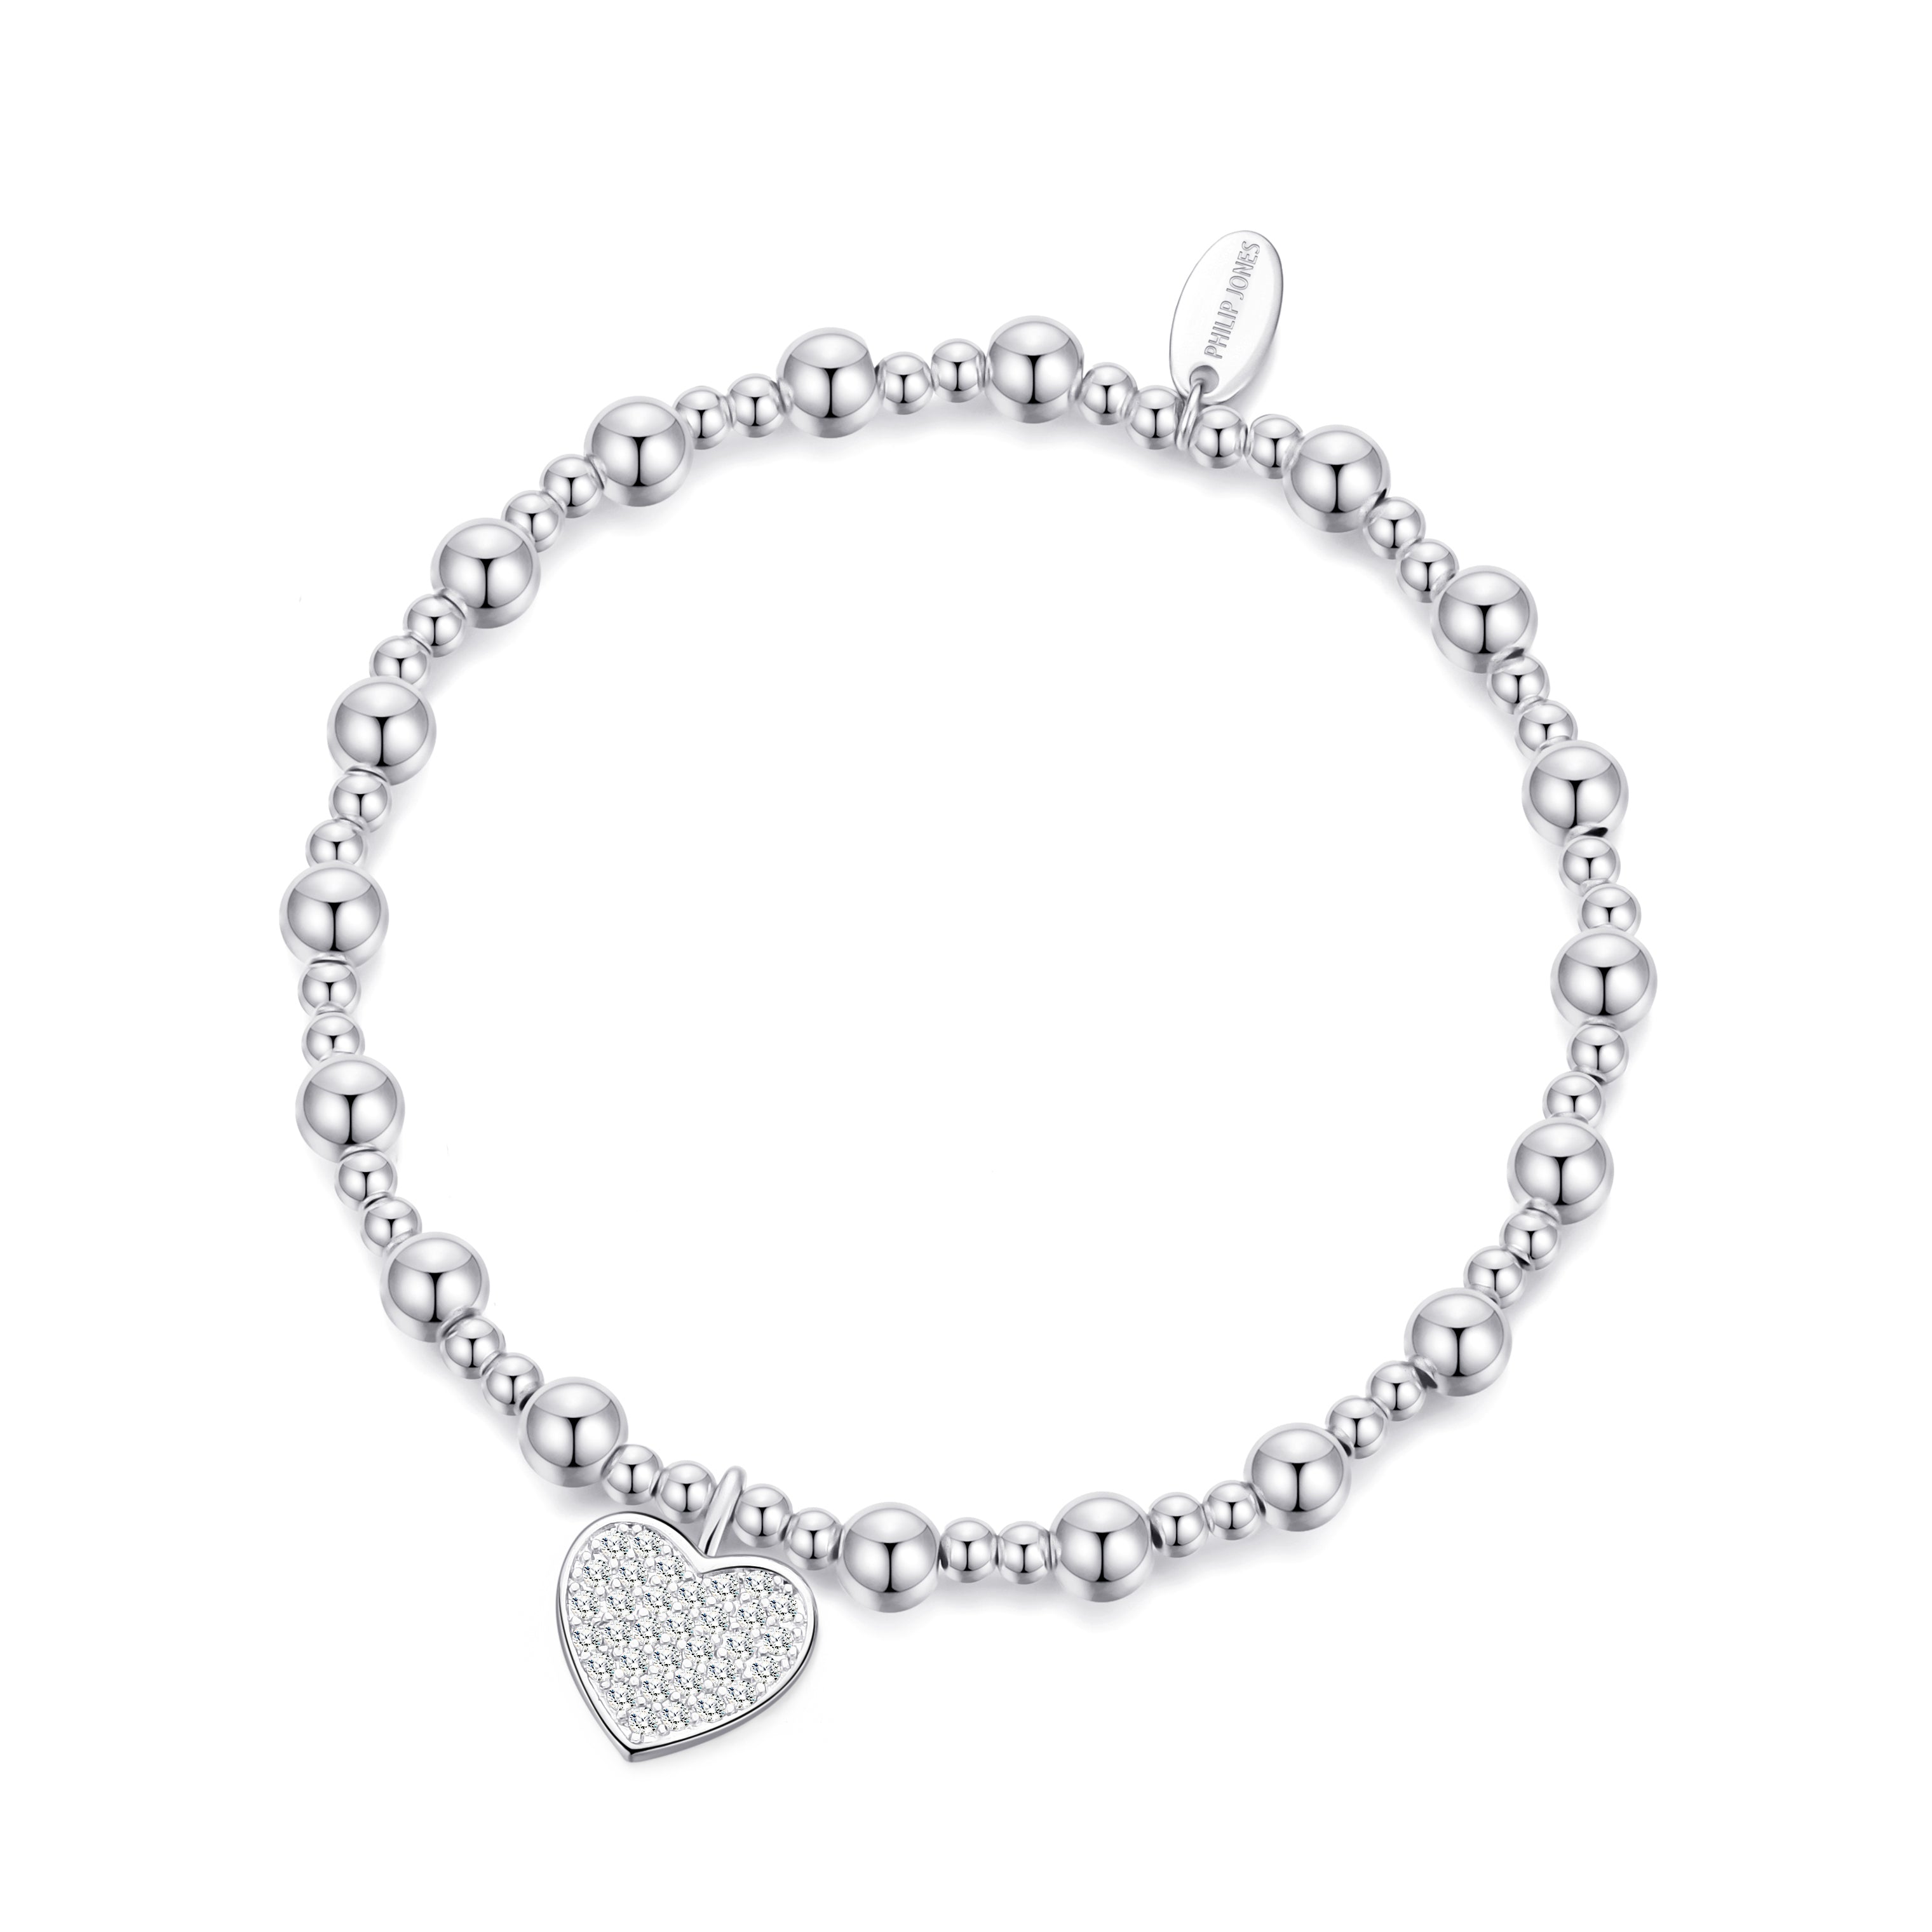 40th Birthday Heart Charm Stretch Bracelet with Quote Gift Box